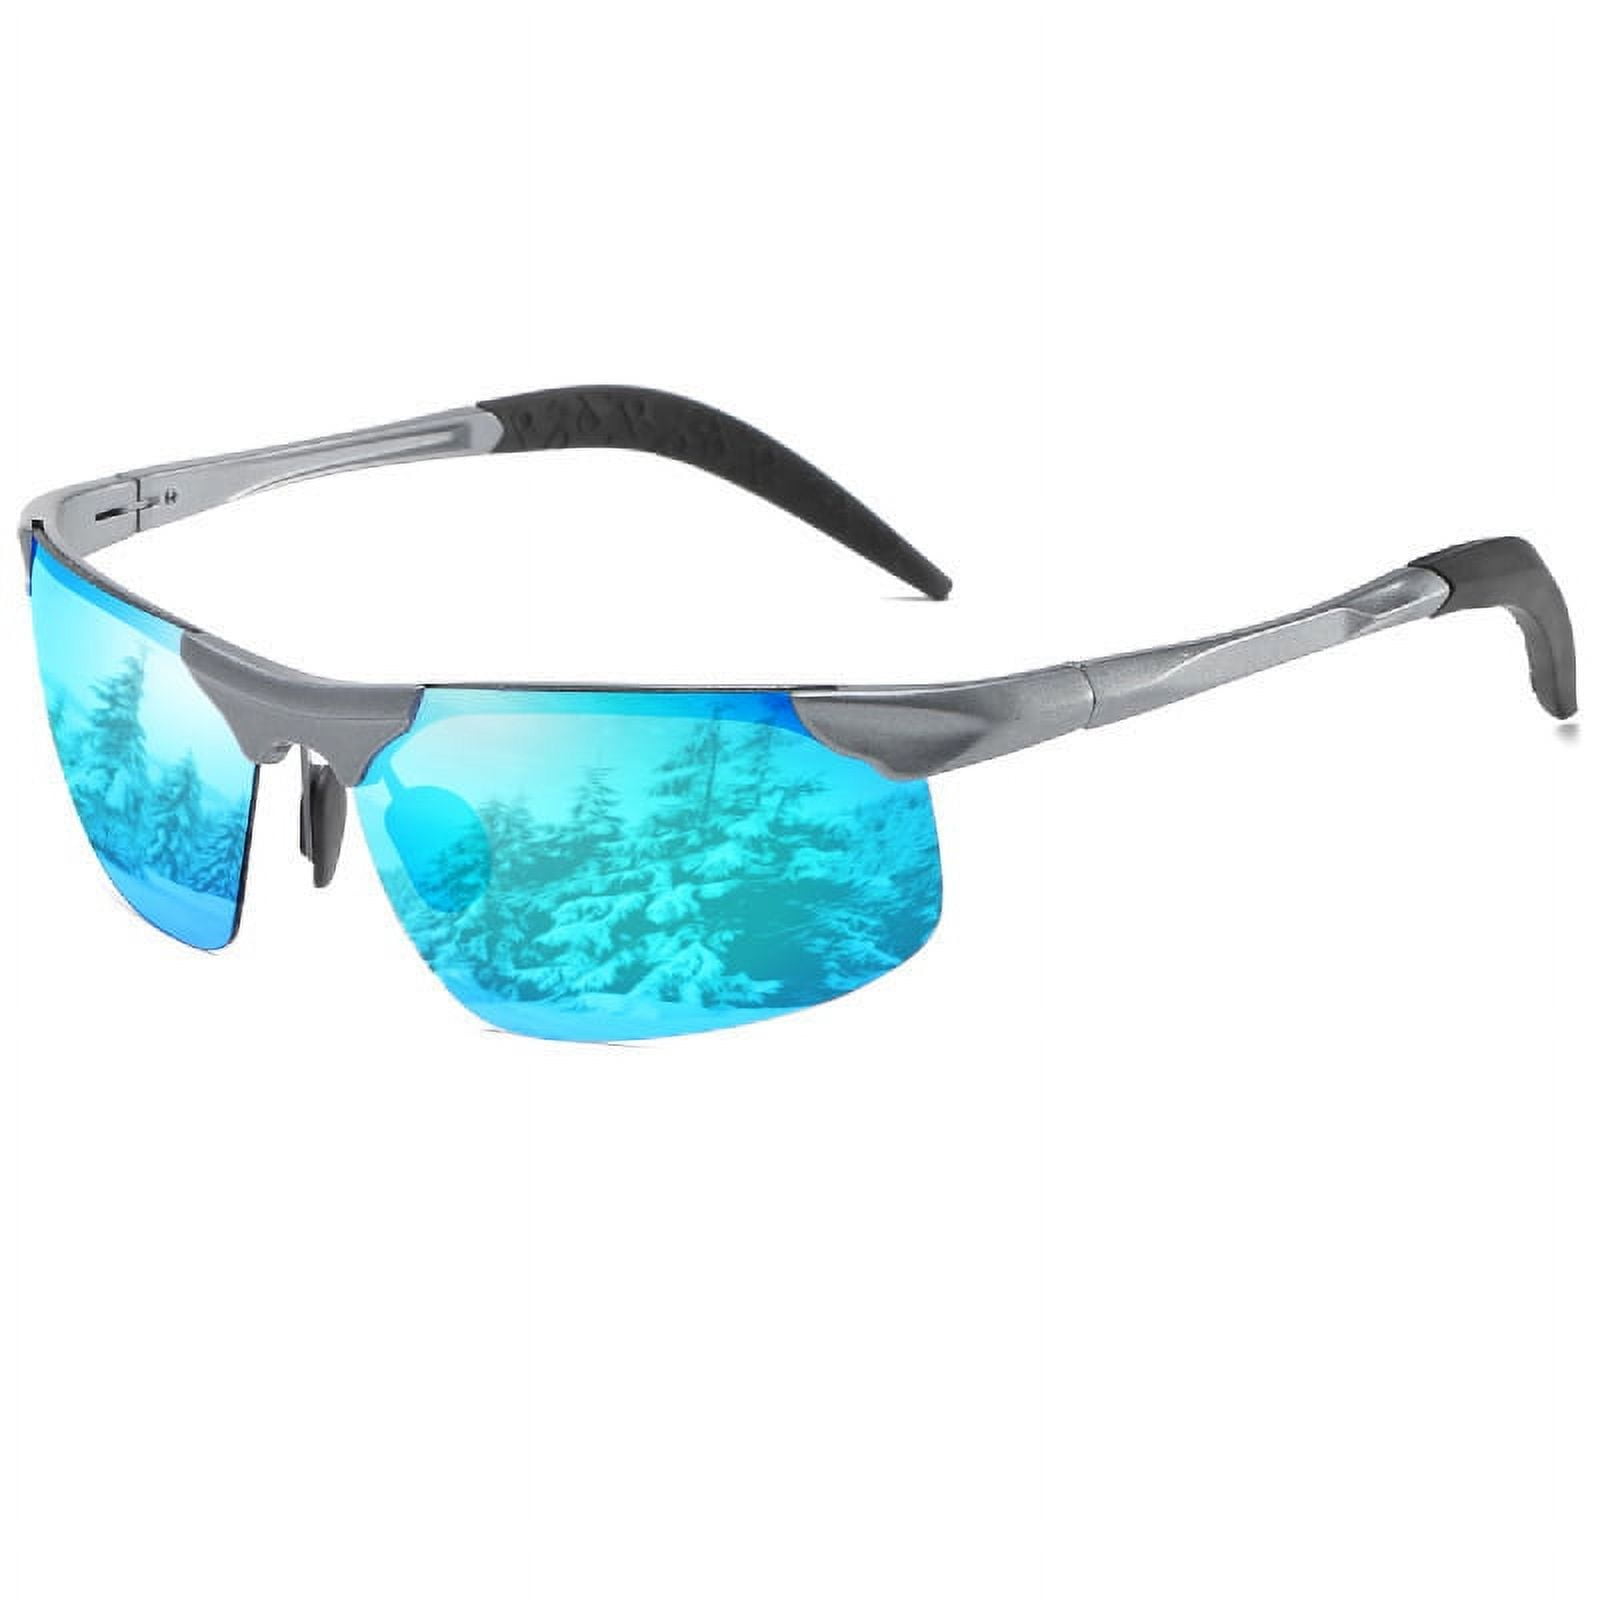 AABV Polarized Sports Sunglasses for Men Women Cycling Running